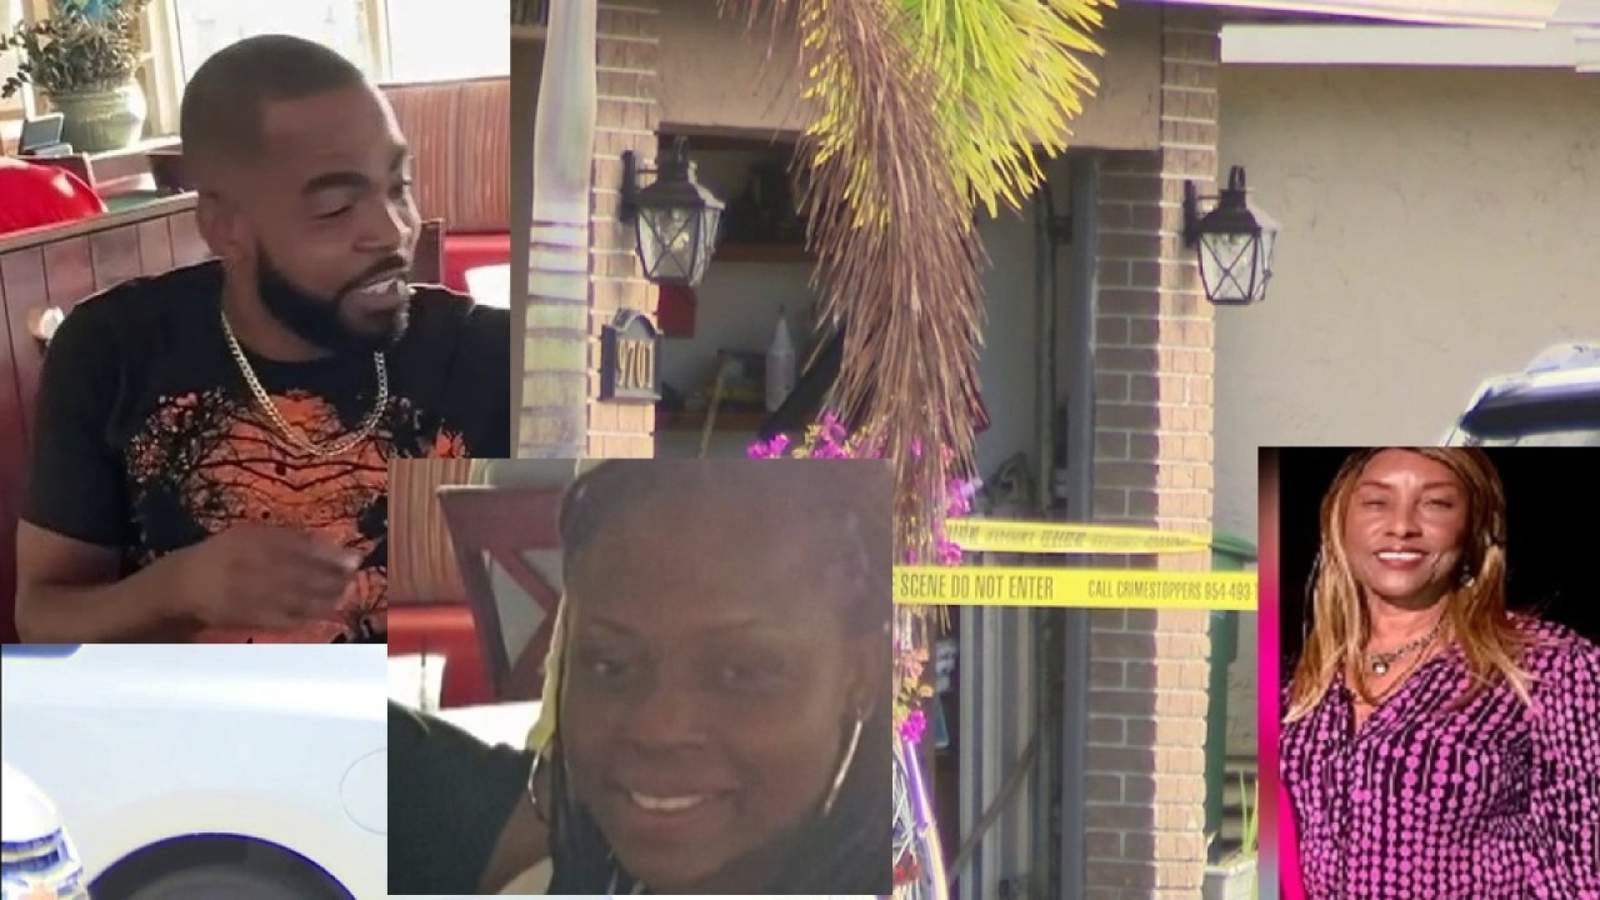 Tamarac tragedy: Father of 3 kills wife, mother-in-law in suspected murder-suicide, according to BSO